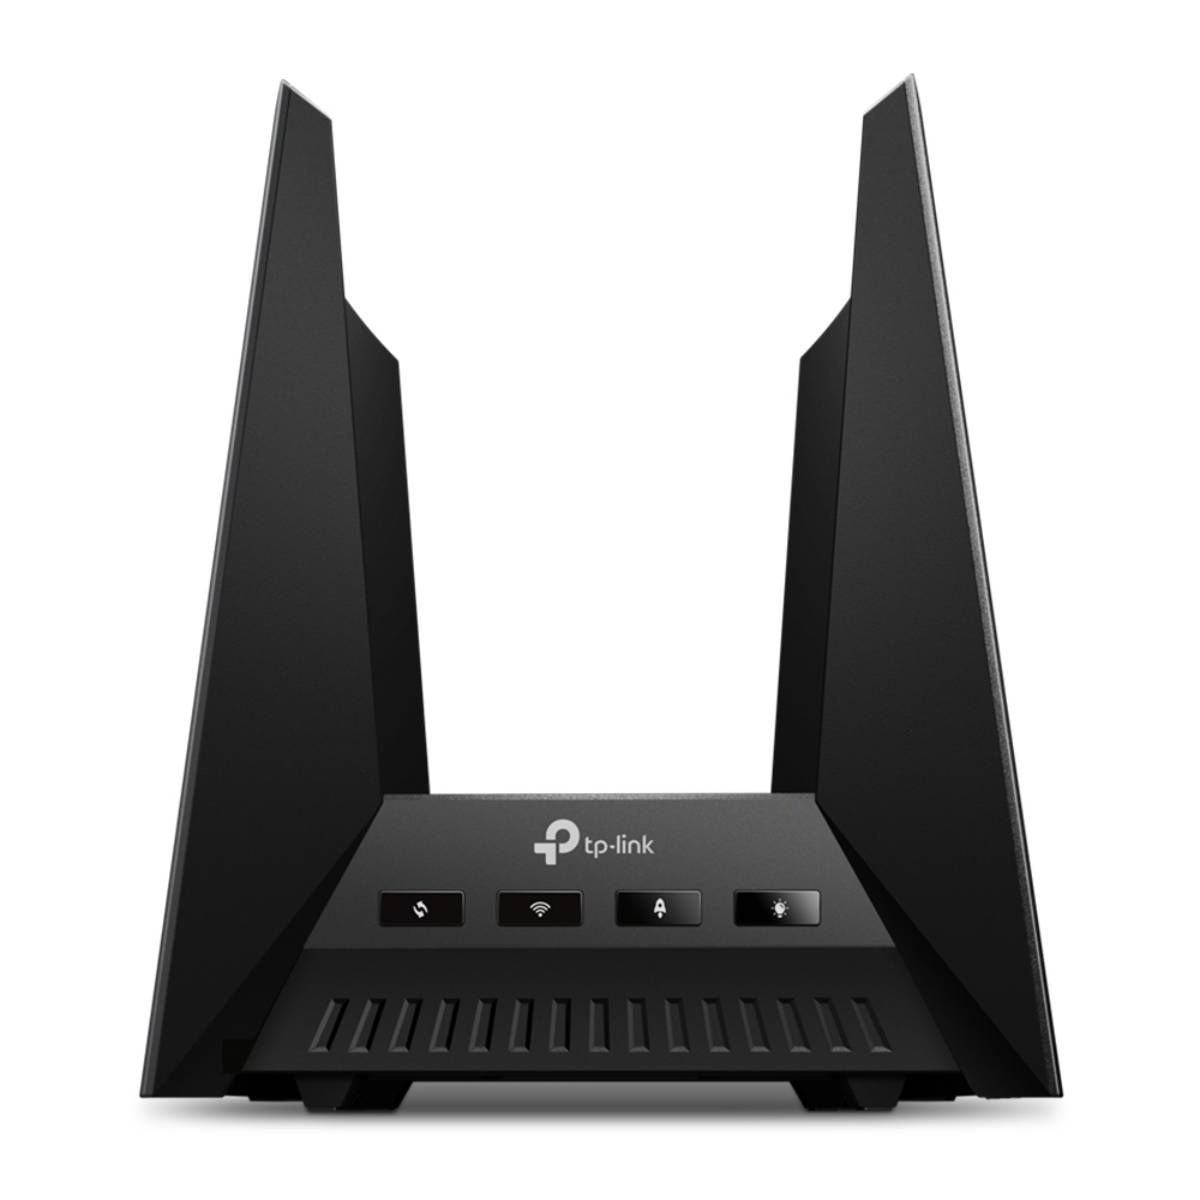 TP-Link Archer GE800 - BE19000 Tri-Band WiFi 7 Gaming Router, , large image number 1